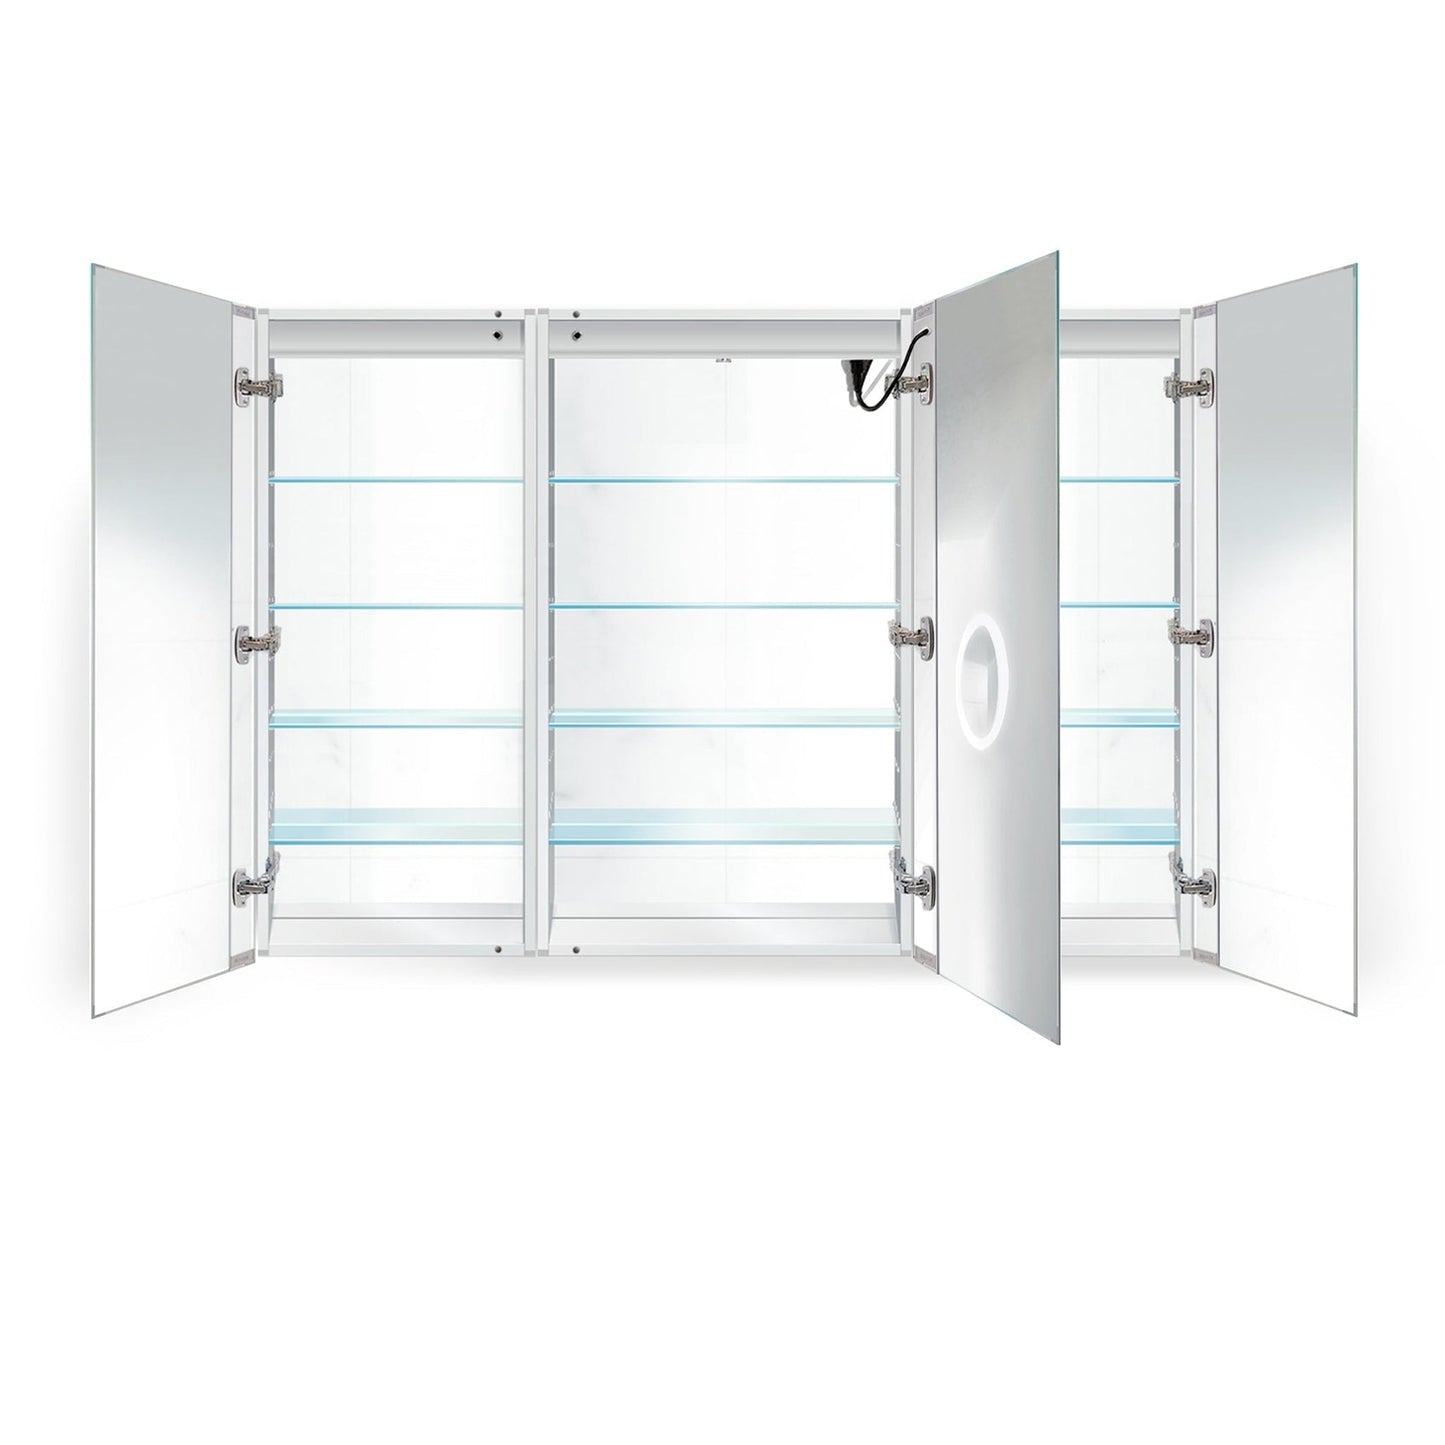 Krugg Reflections Svange 60" x 42" 5000K Single Tri-View Left-Right-Right Opening Recessed/Surface-Mount Illuminated Silver Backed LED Medicine Cabinet Mirror With Built-in Defogger, Dimmer and Electrical Outlet